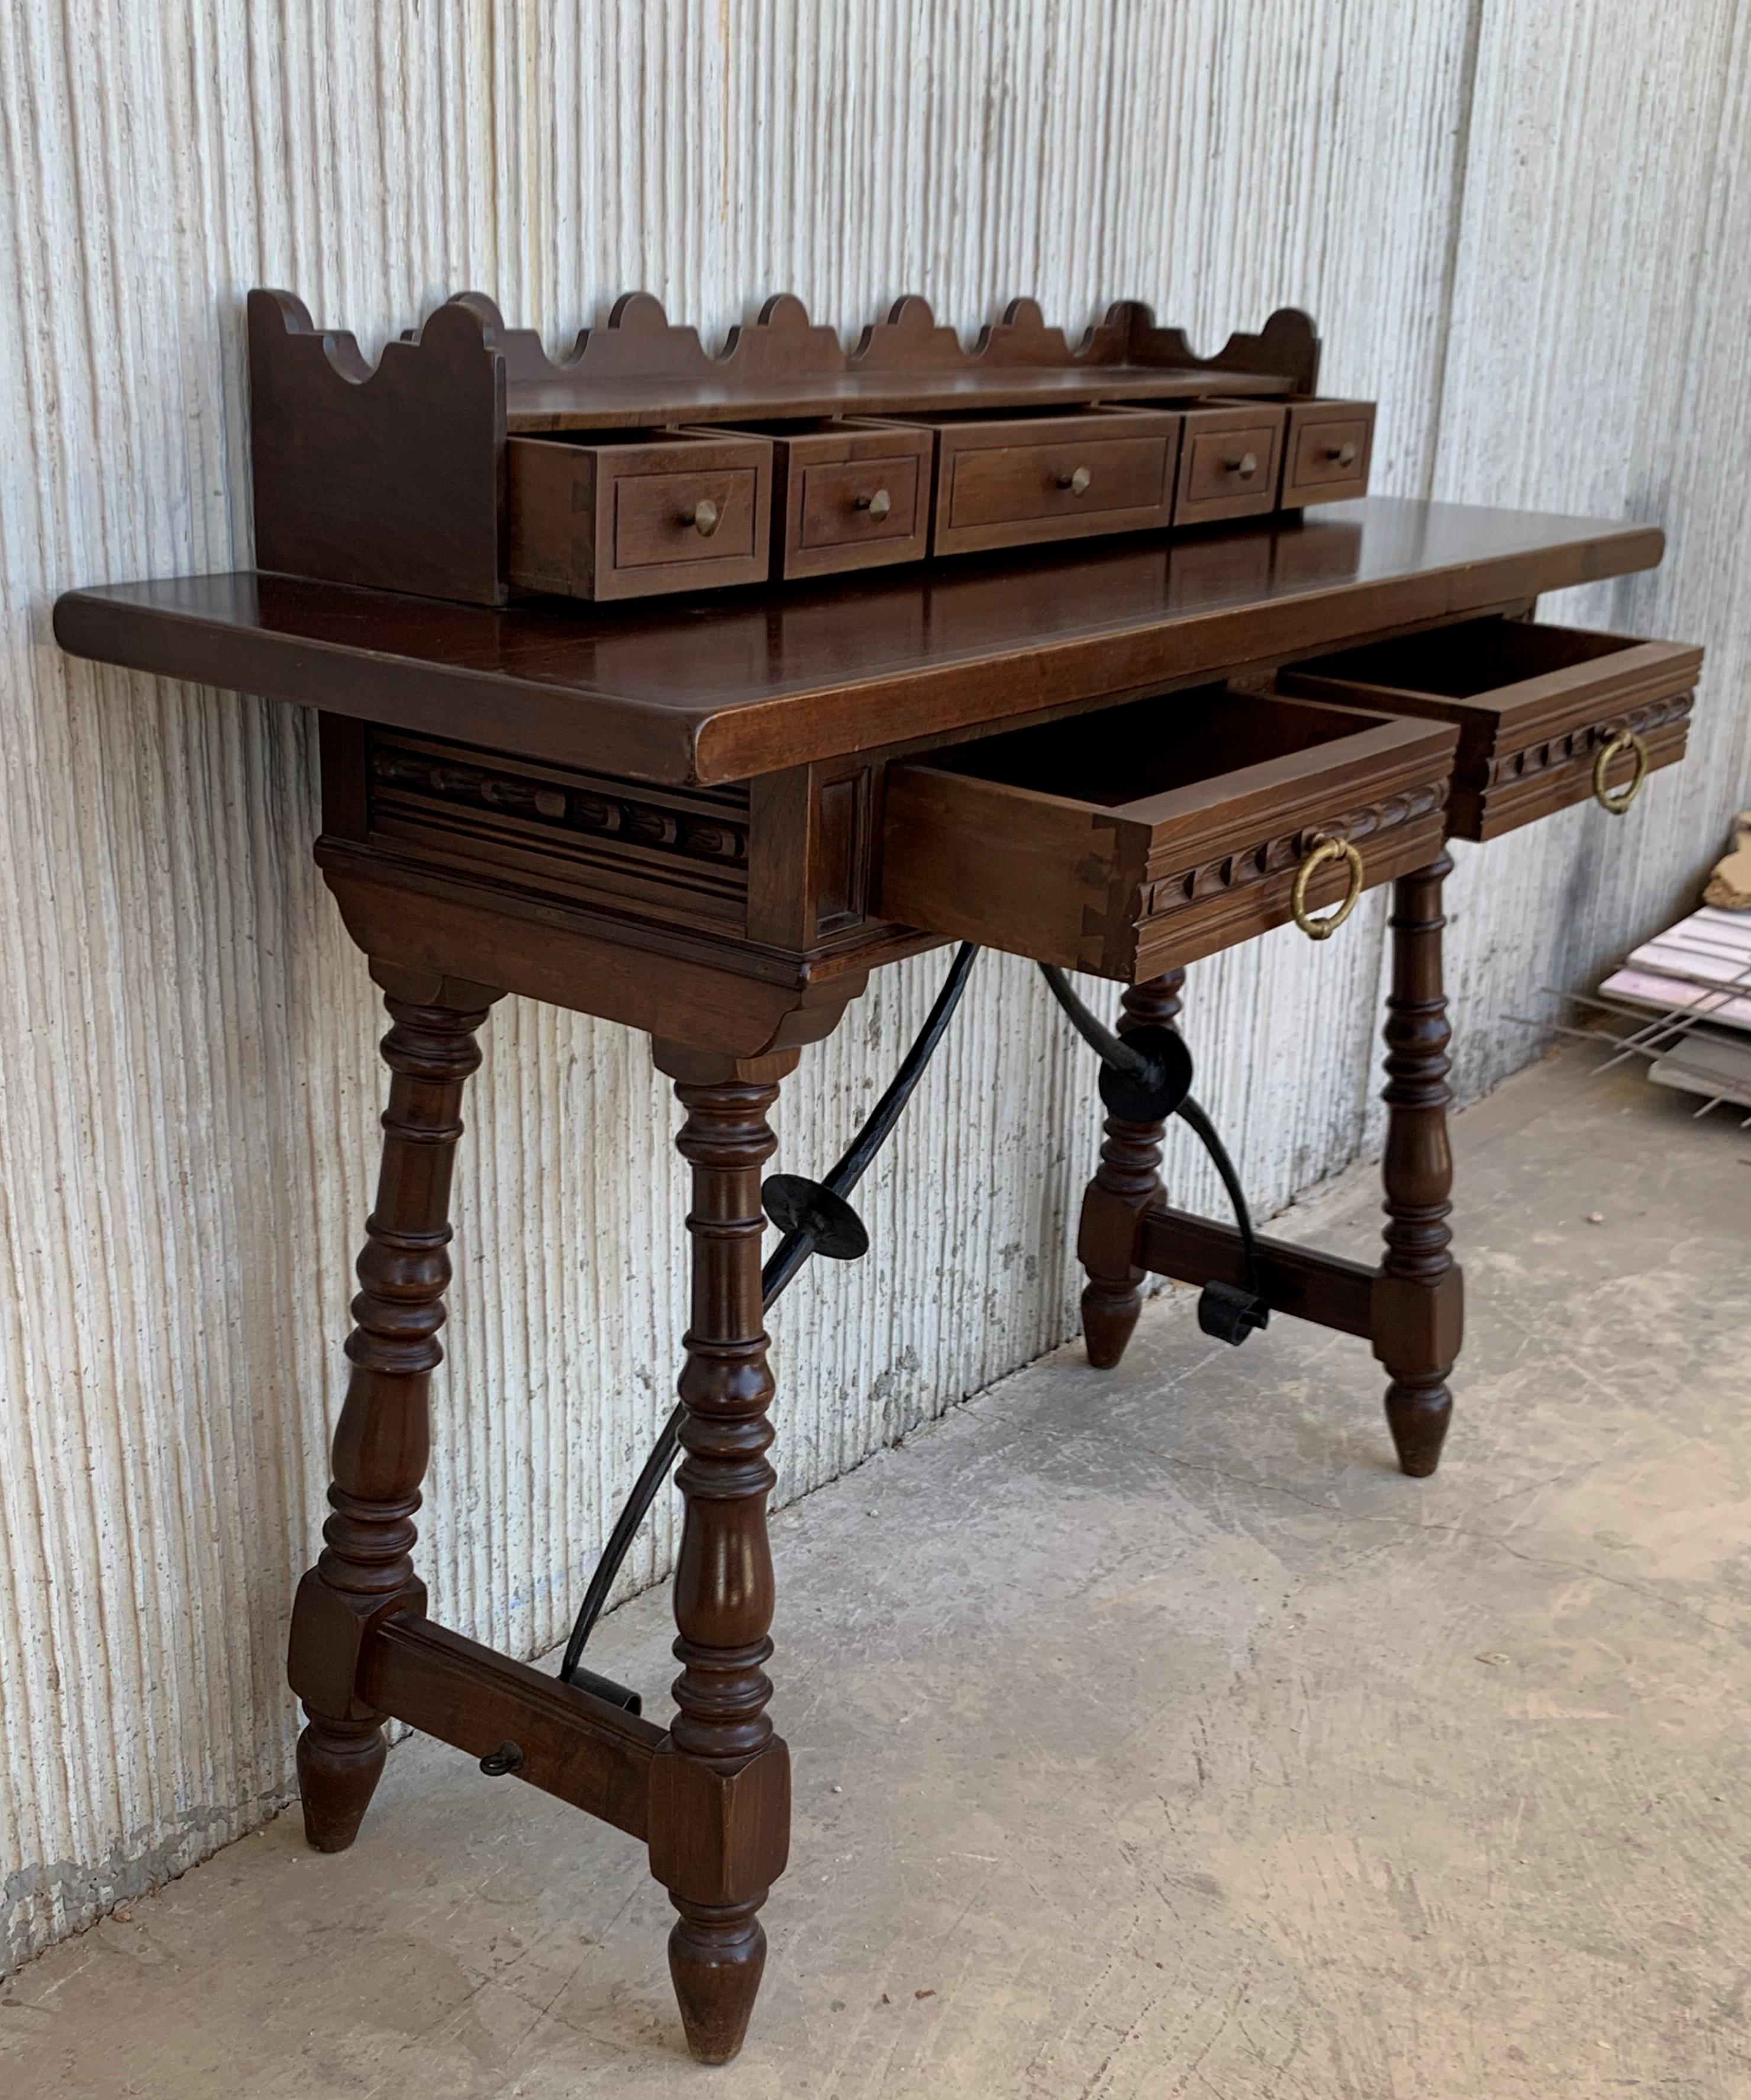 Baroque Catalan Spanish Lady Desk or Console Table in Carved Walnut and Iron Stretcher